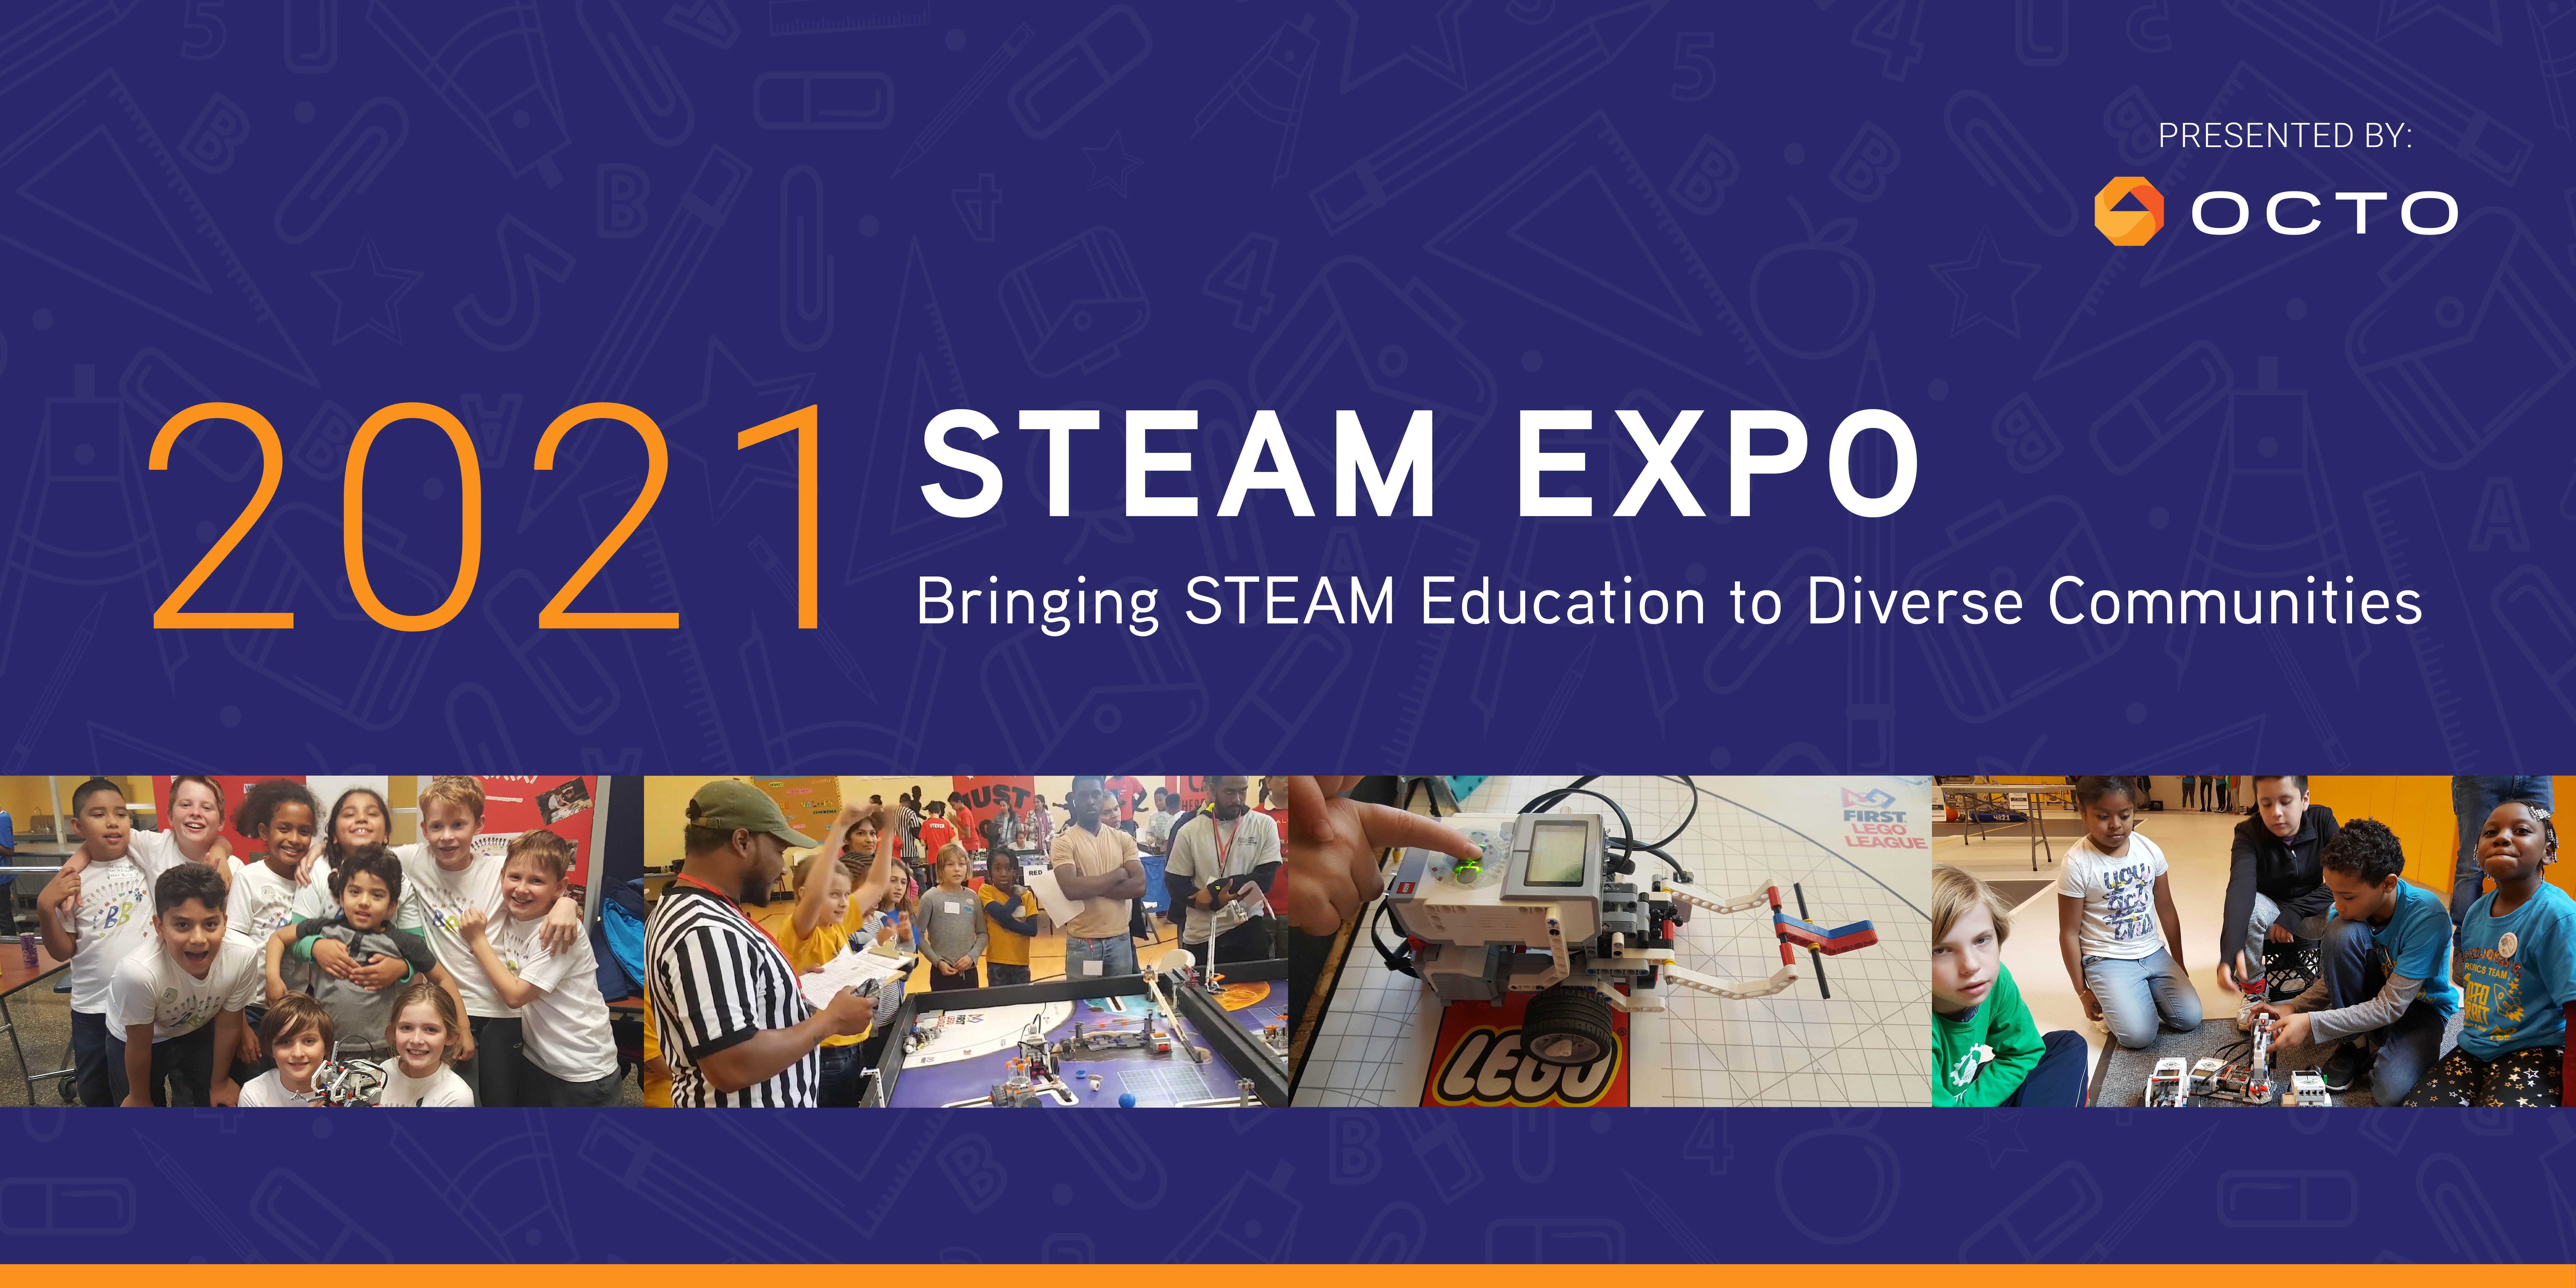 Octo to Hold 2021 Virtual STEAM Expo to Engage Underrepresented Students